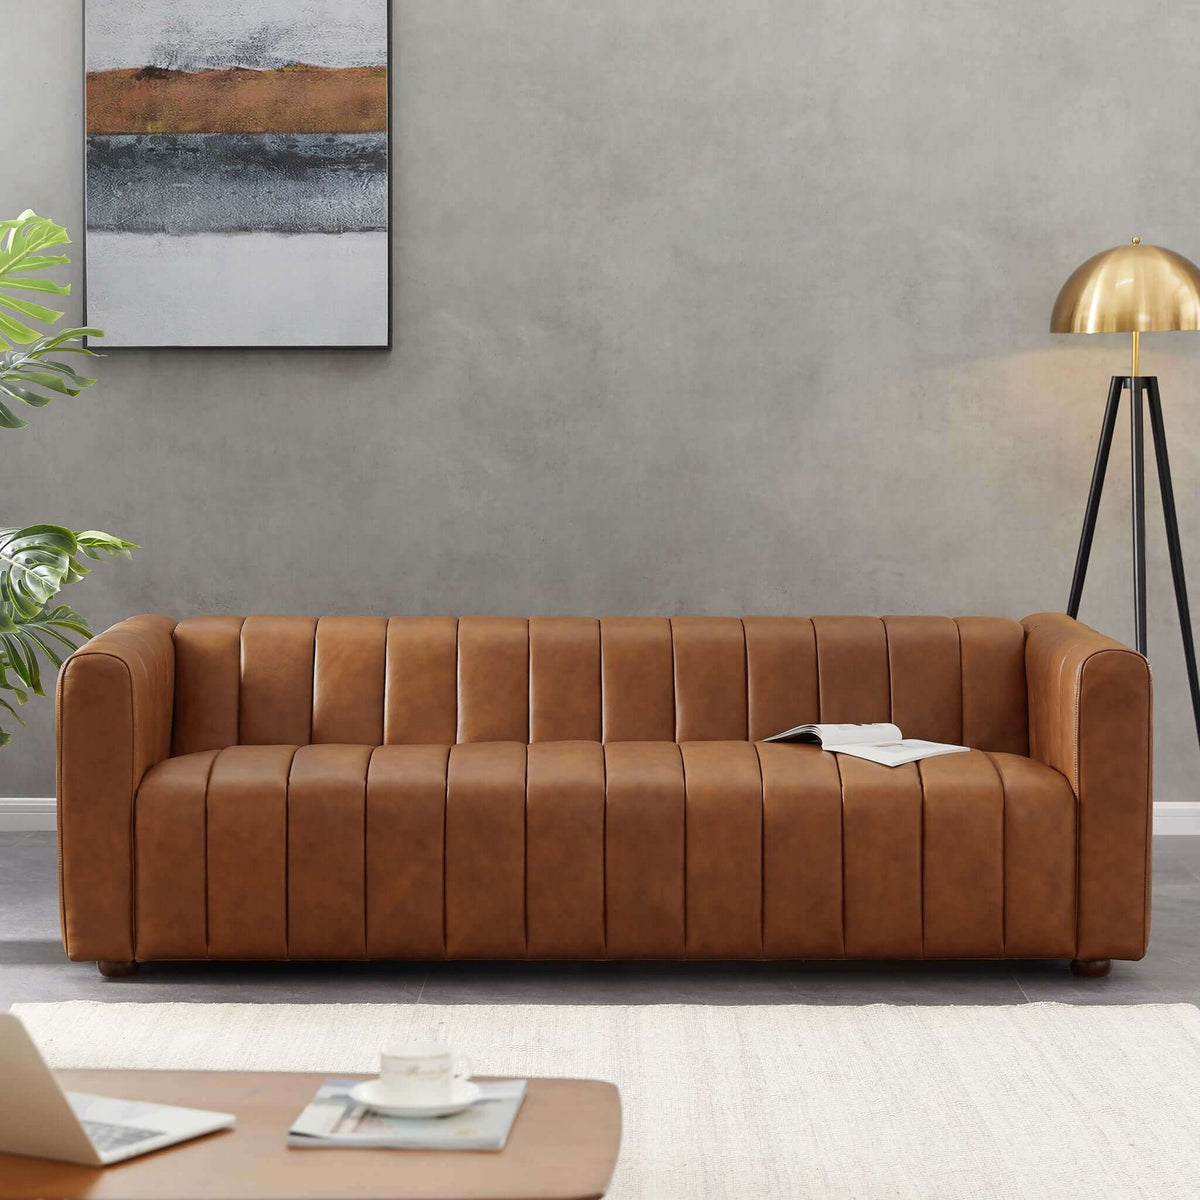 Avery Sofa - Cognac Leather Couch | Ashcroft Furniture | Houston TX | The Best Drop shipping Supplier in the USA